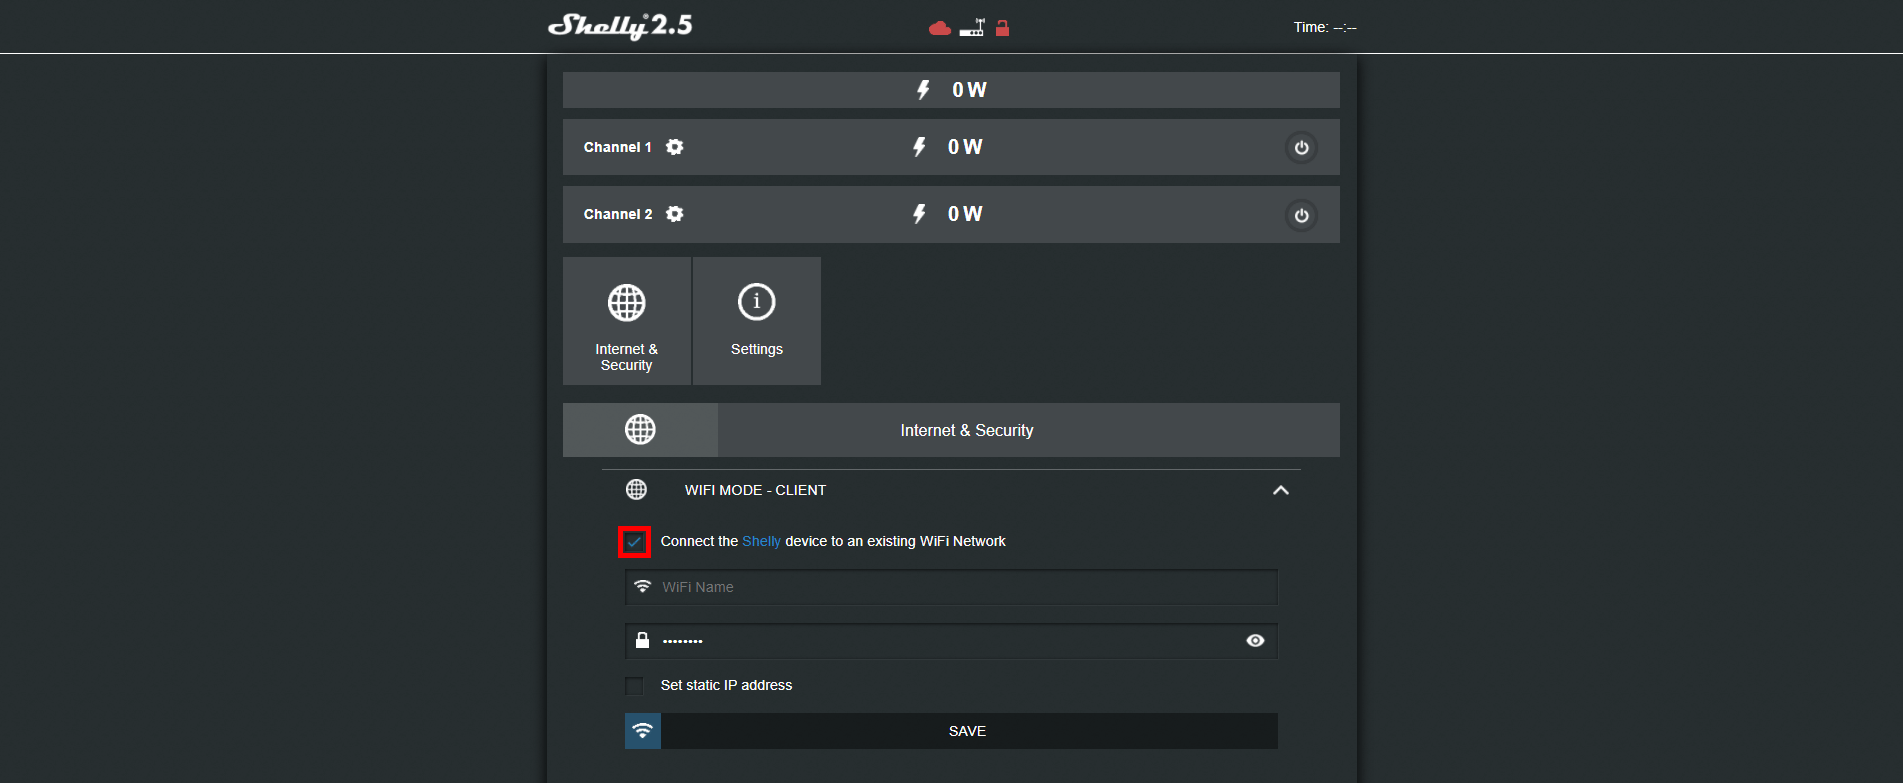 How to enable the wifi mode client inside the shelly's 2.5 web interface